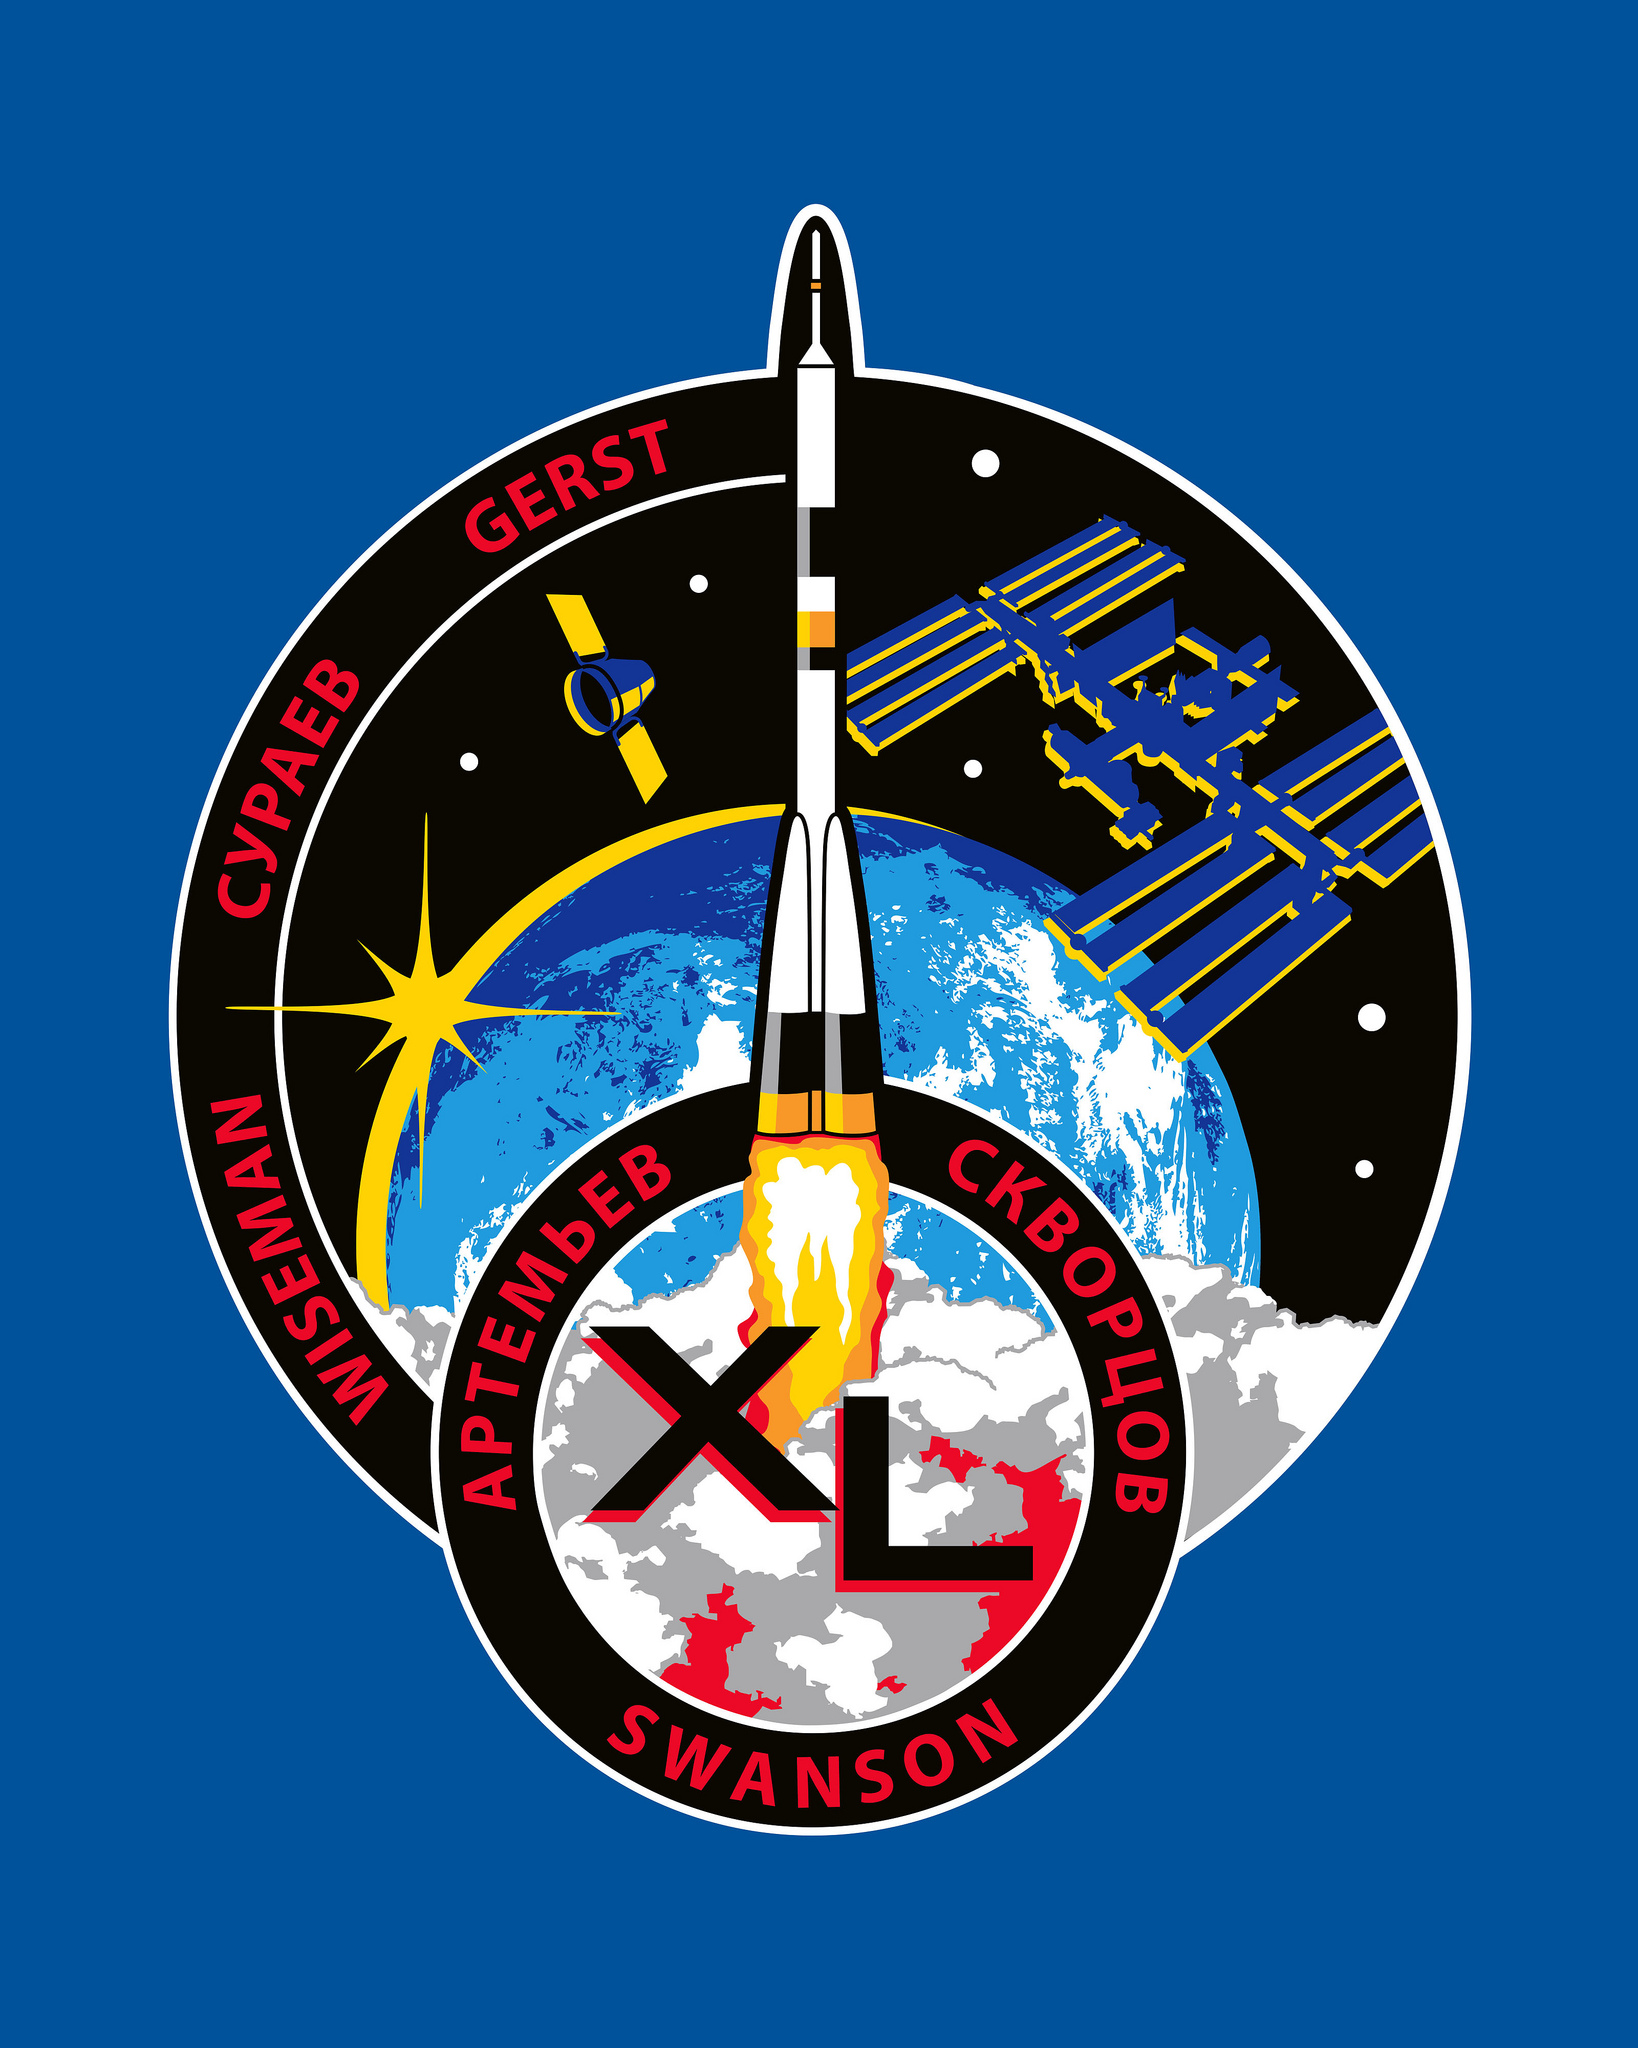 The Expedition 40 crew patch, emblazoned with the surnames of the U.S.-Russian-German crew. Image Credit: NASA